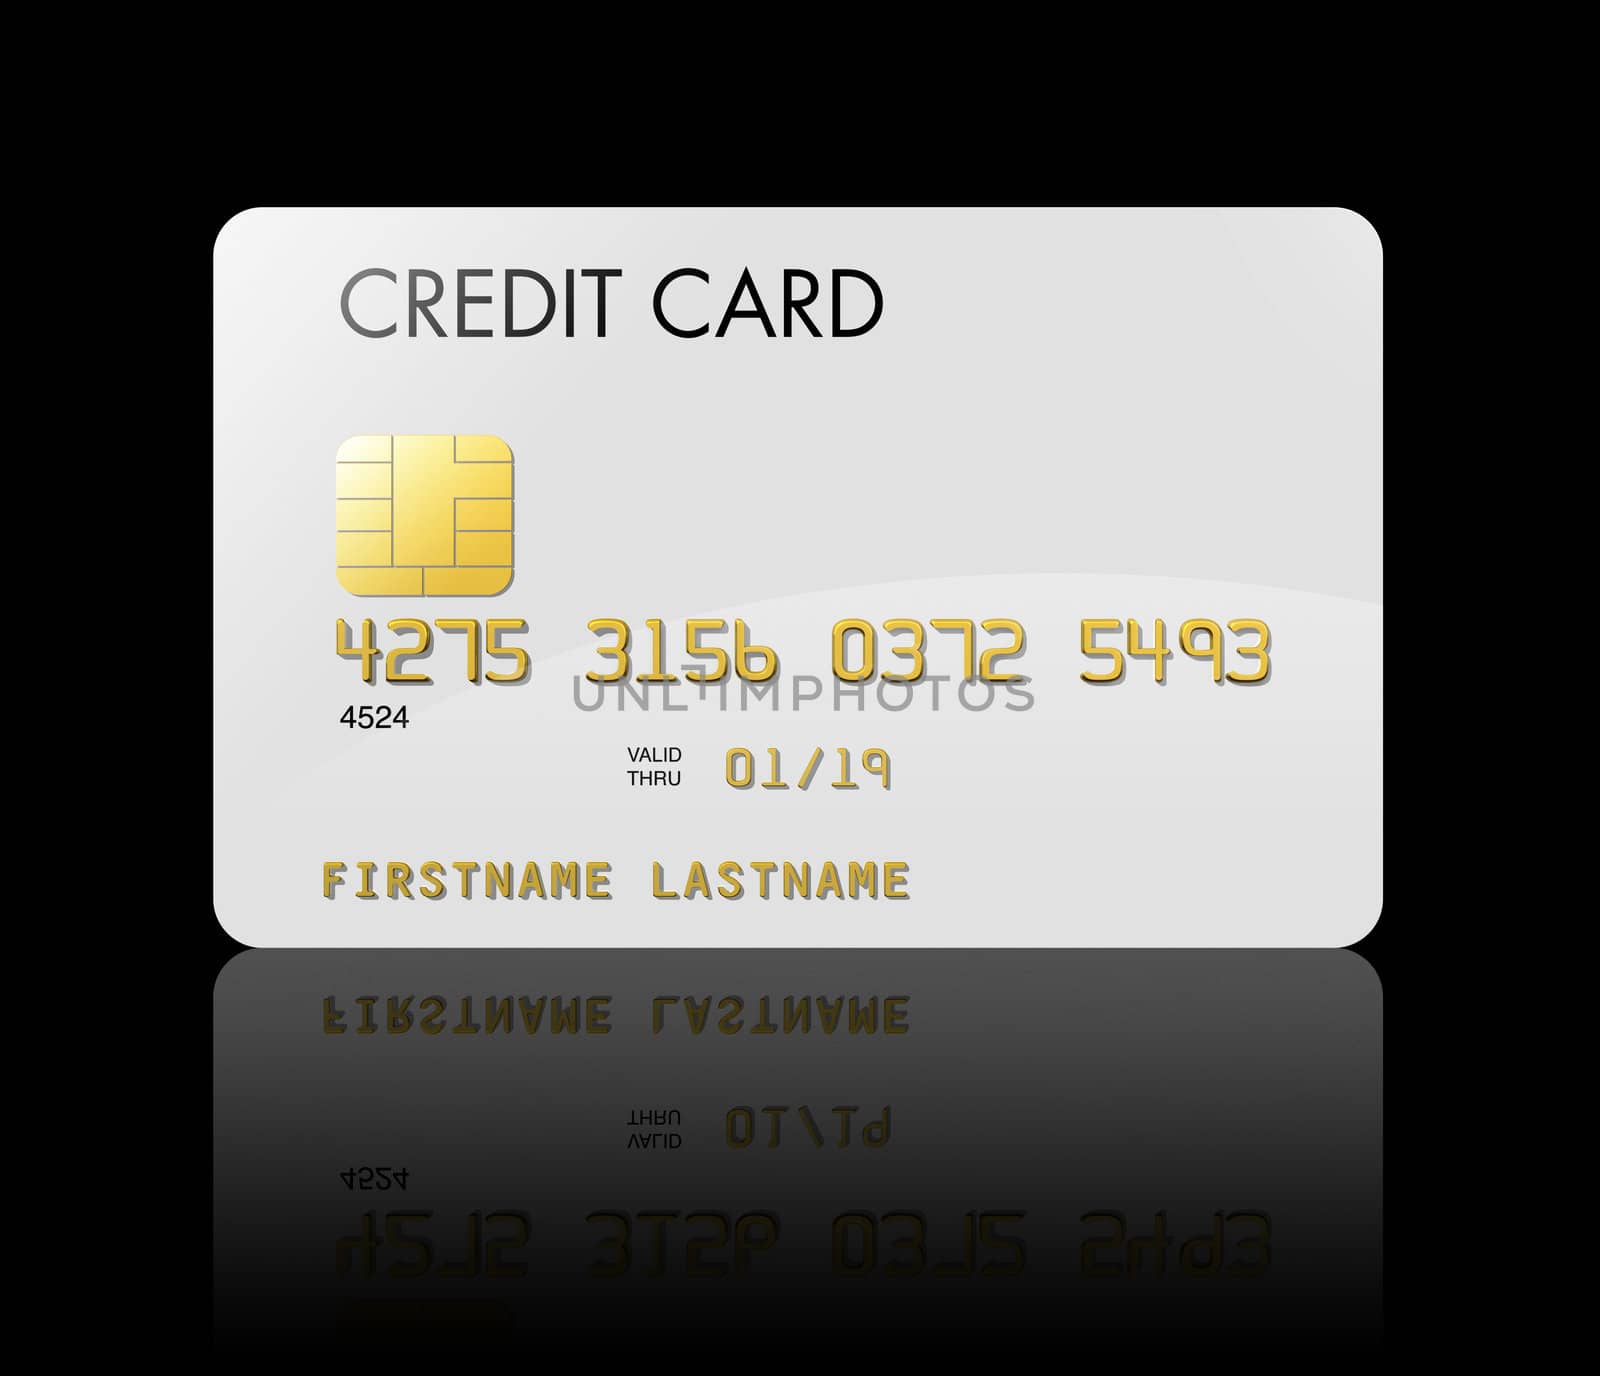 White credit card by daboost